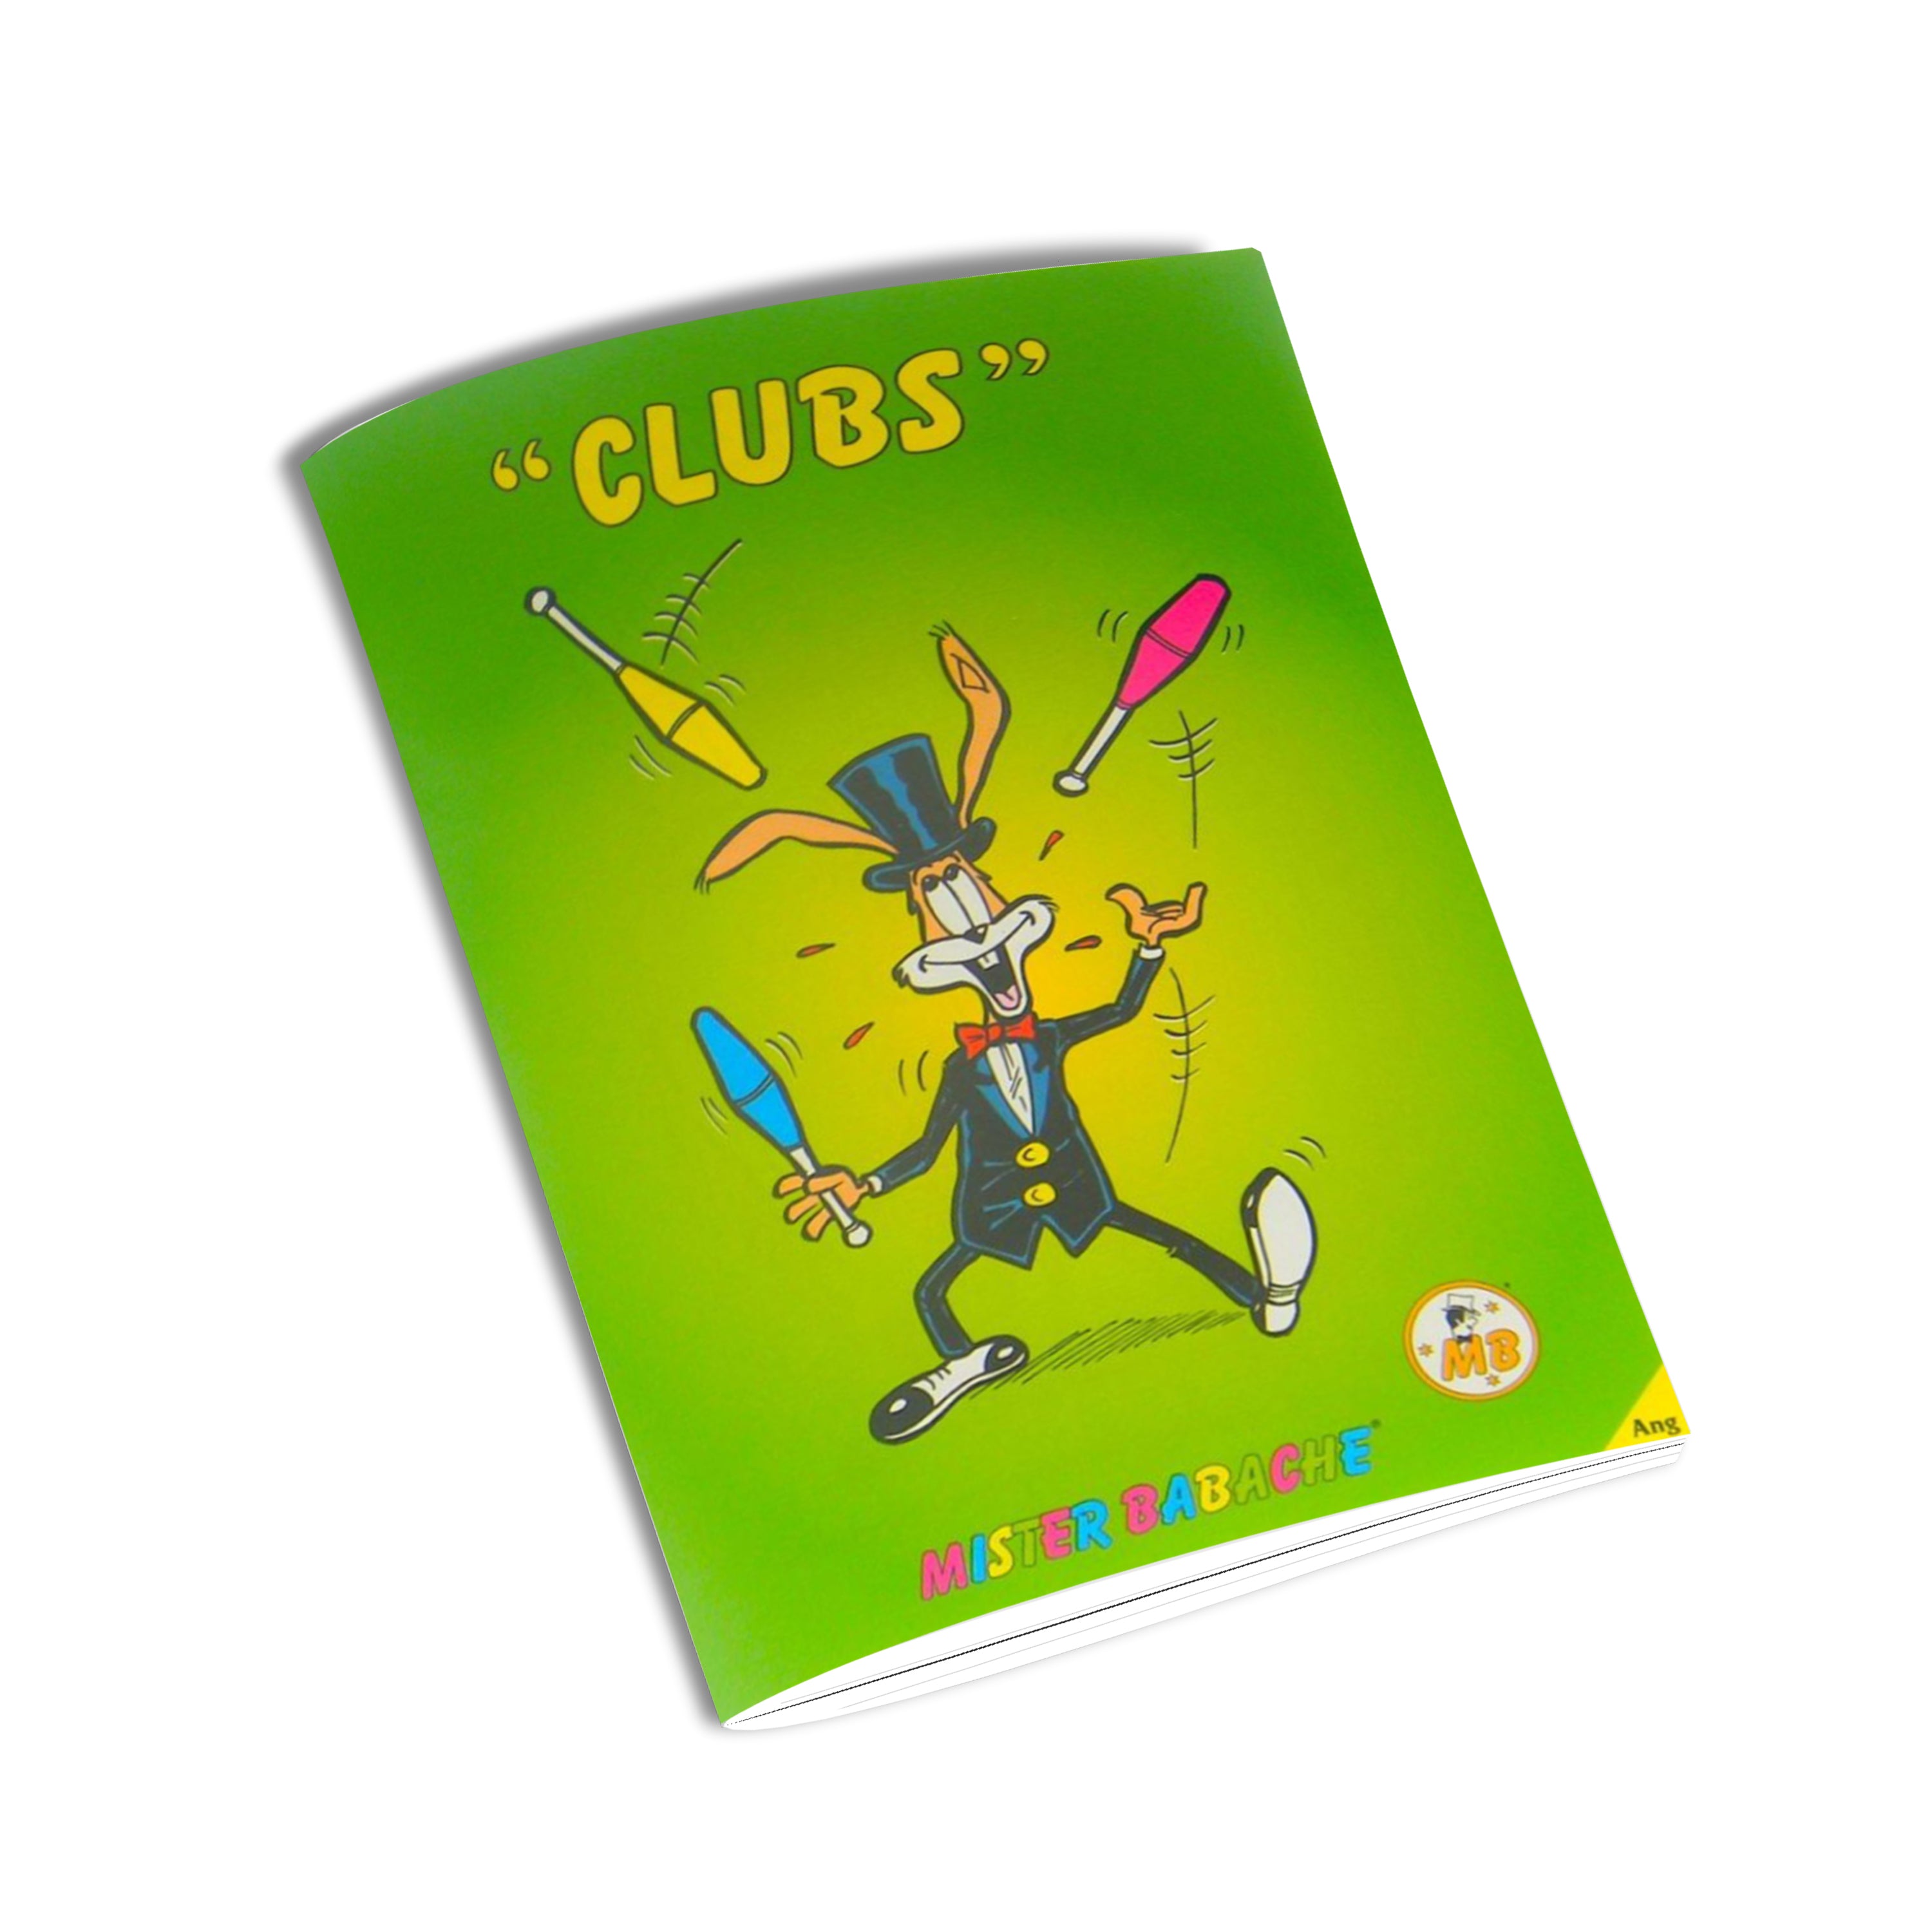 Mr. Babache Club Juggling Booklet (Juggling Book)